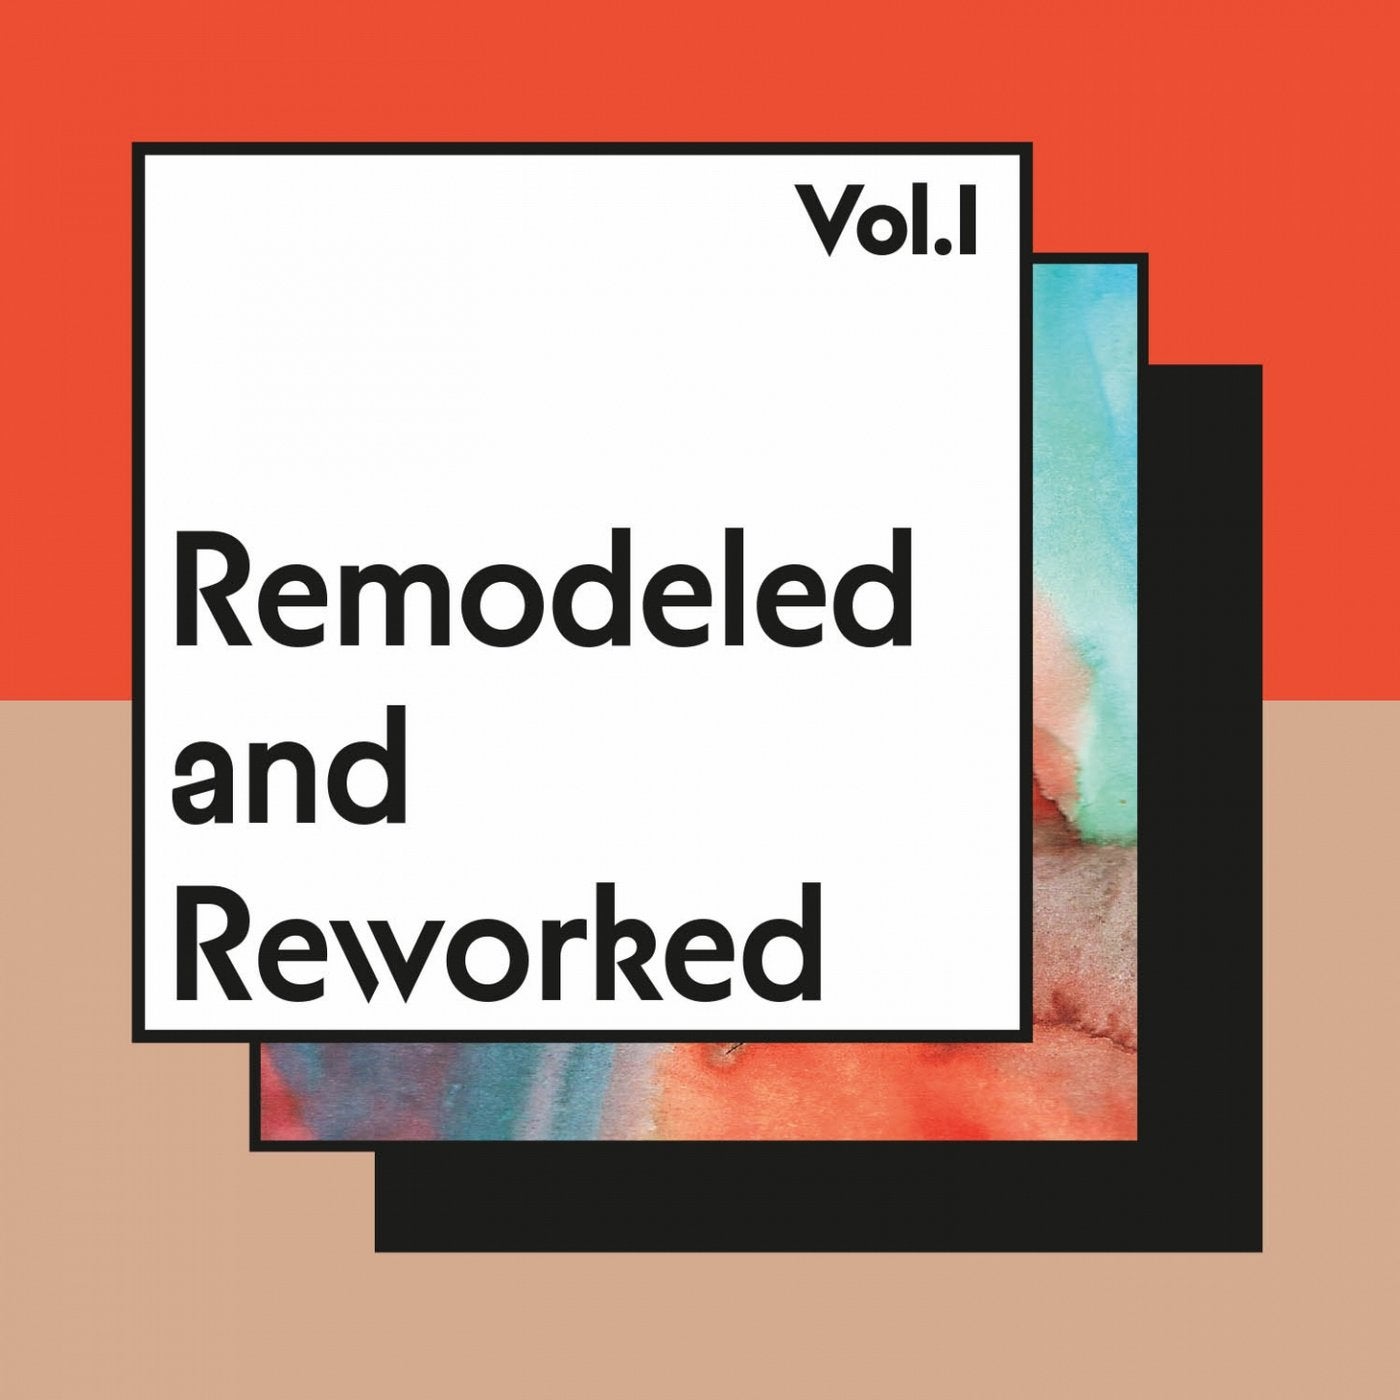 Remodeled and Reworked, Vol. 1